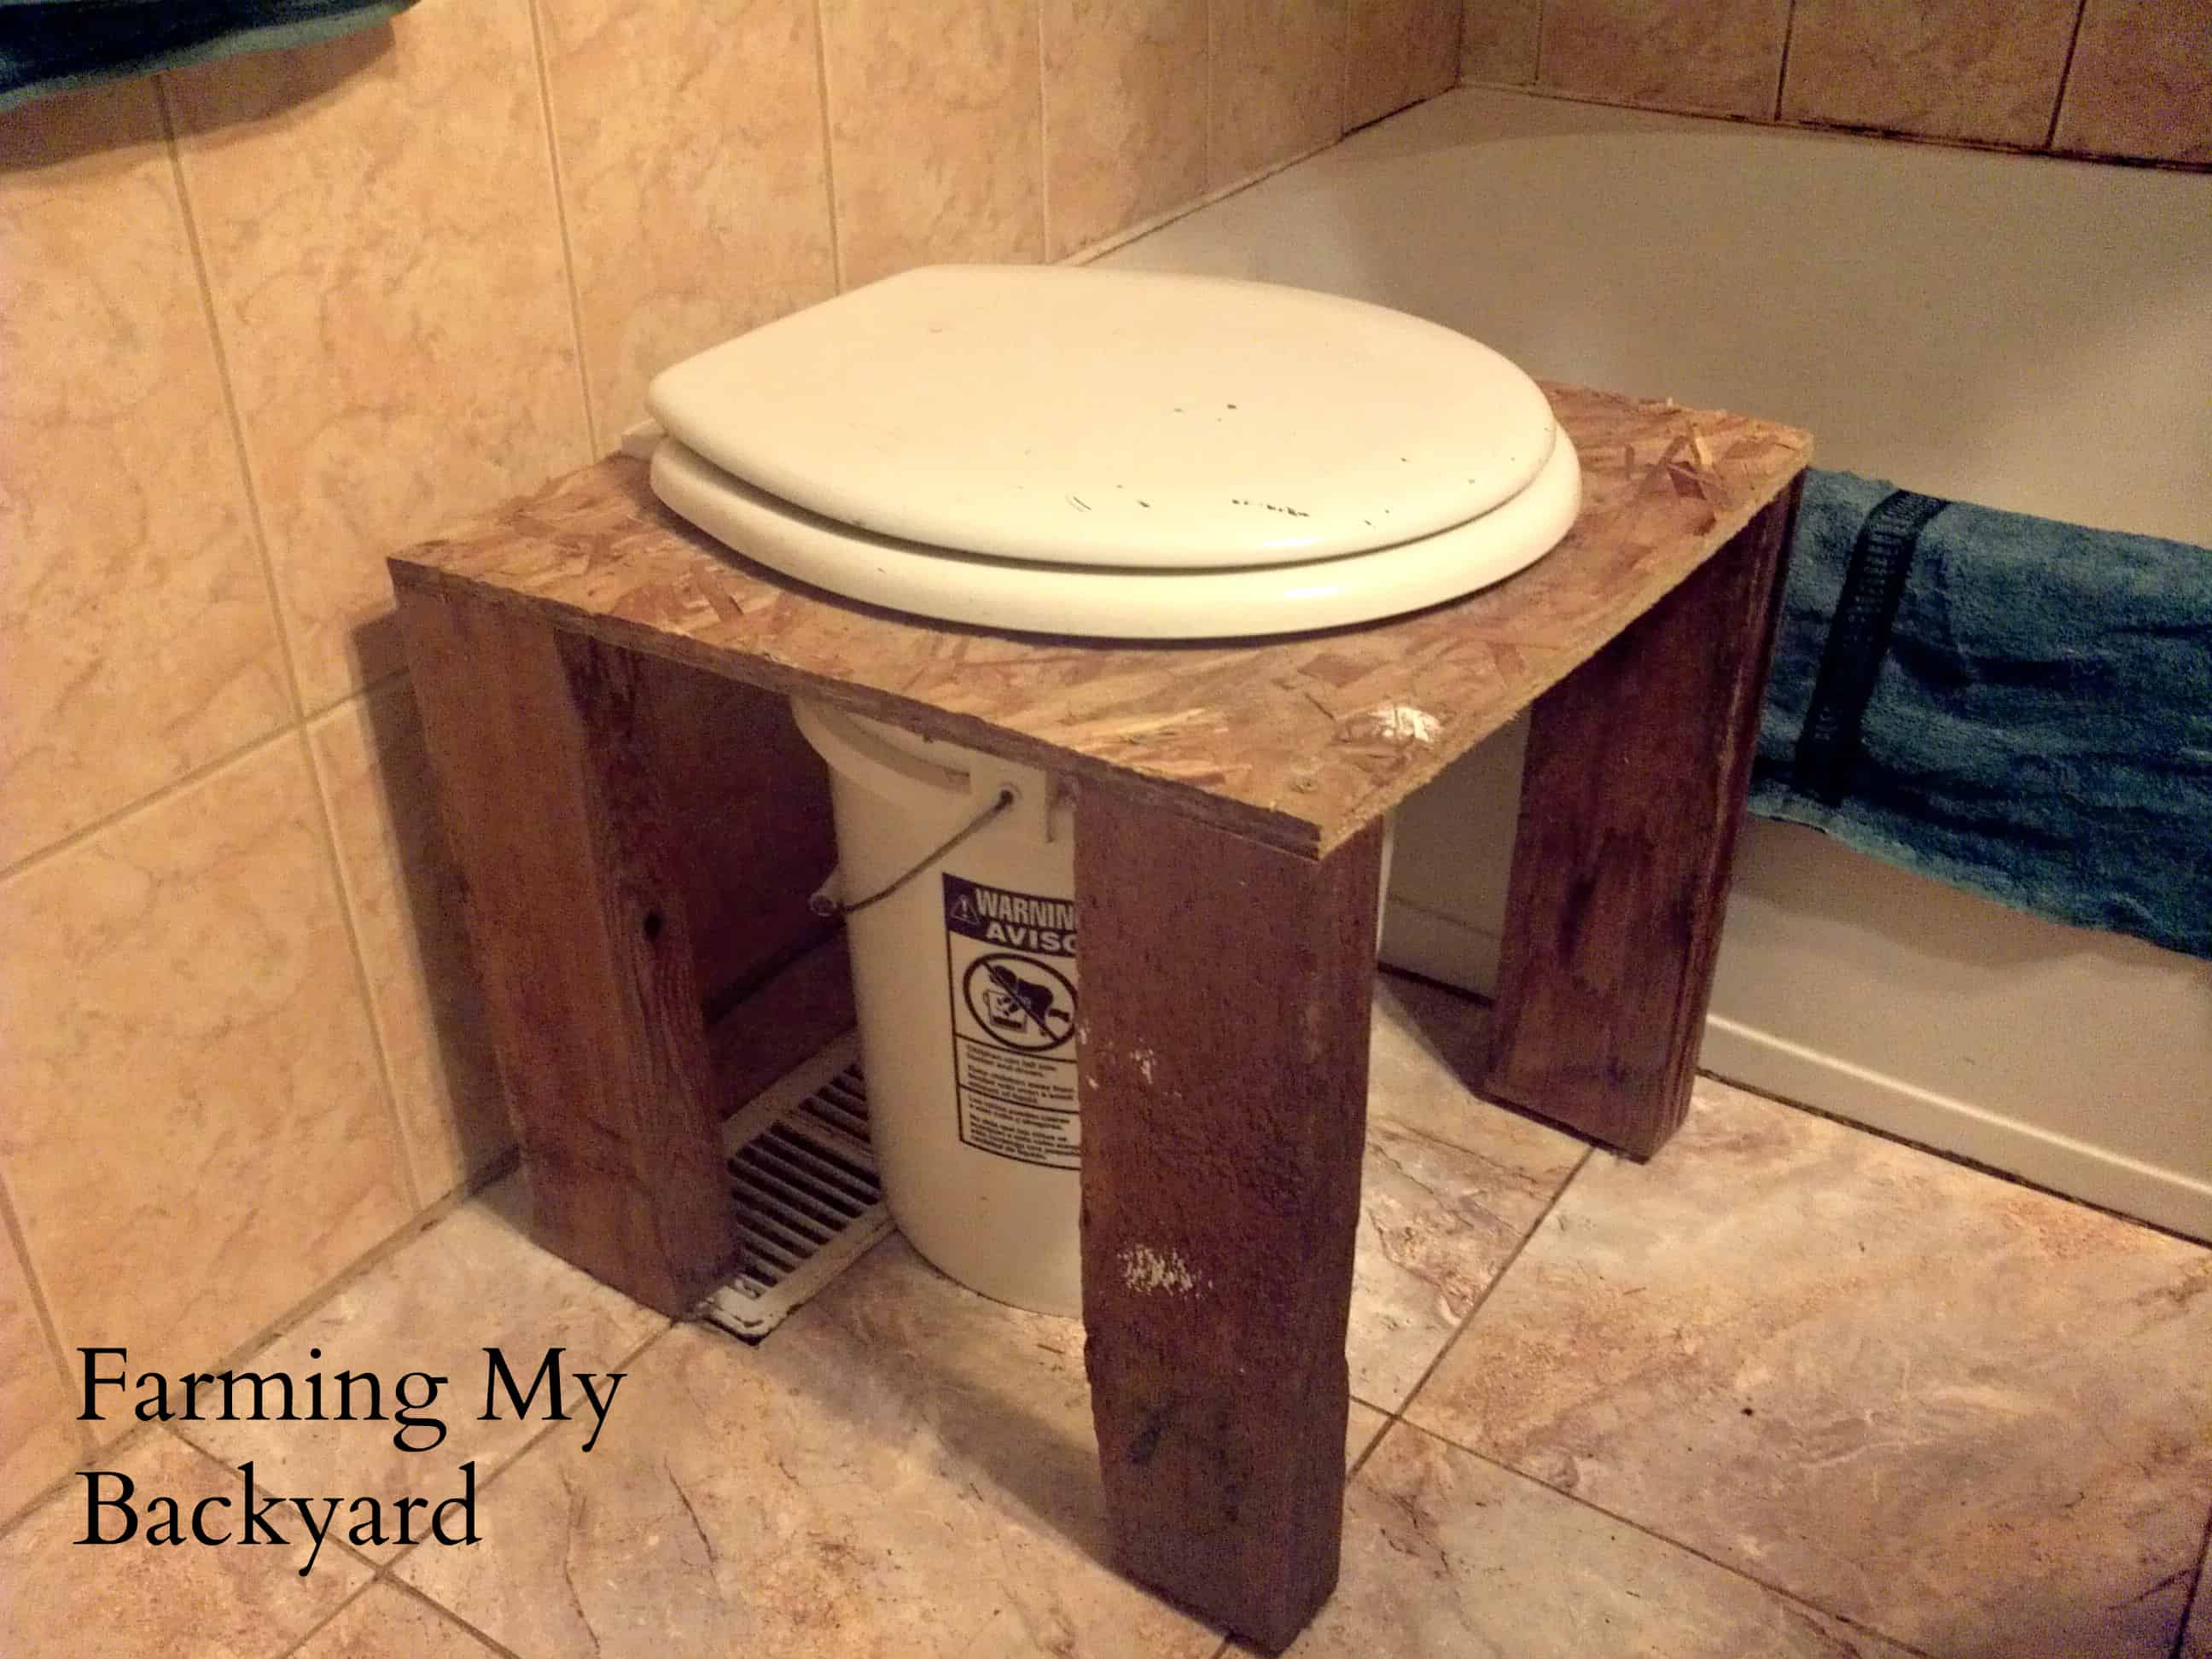 How To Make Your Own Diy Composting Toilet Farming My Backyard